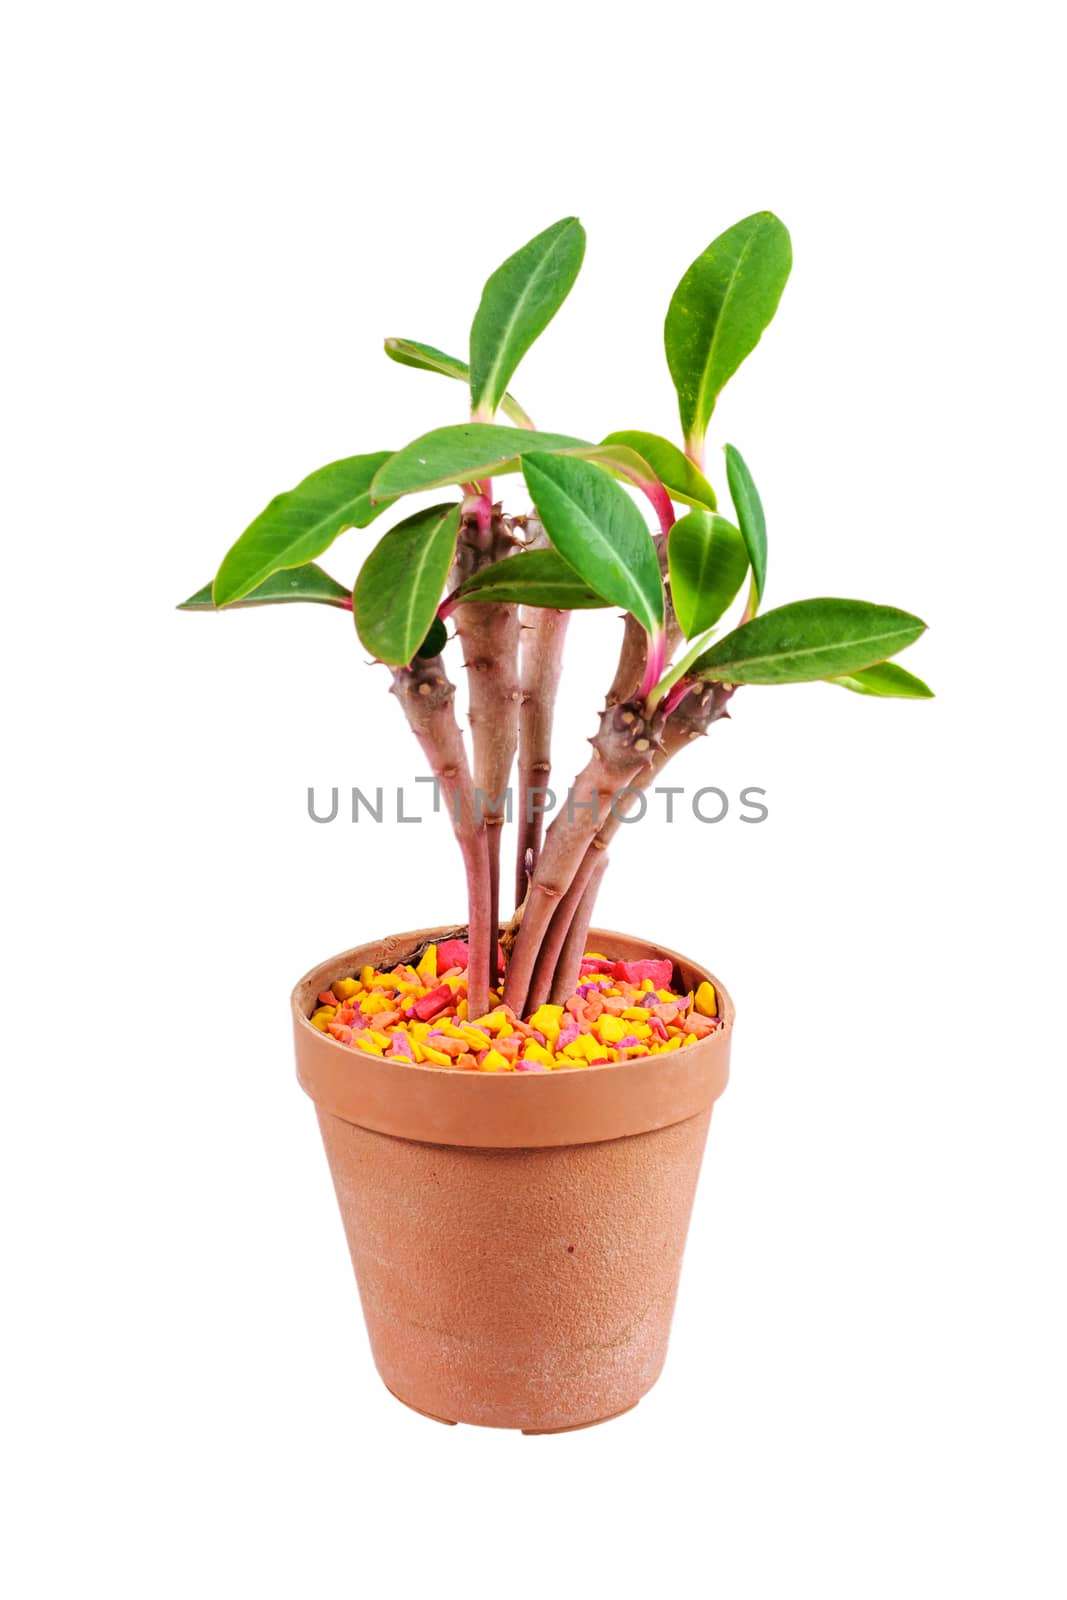 Cactus in potted isolated on white background